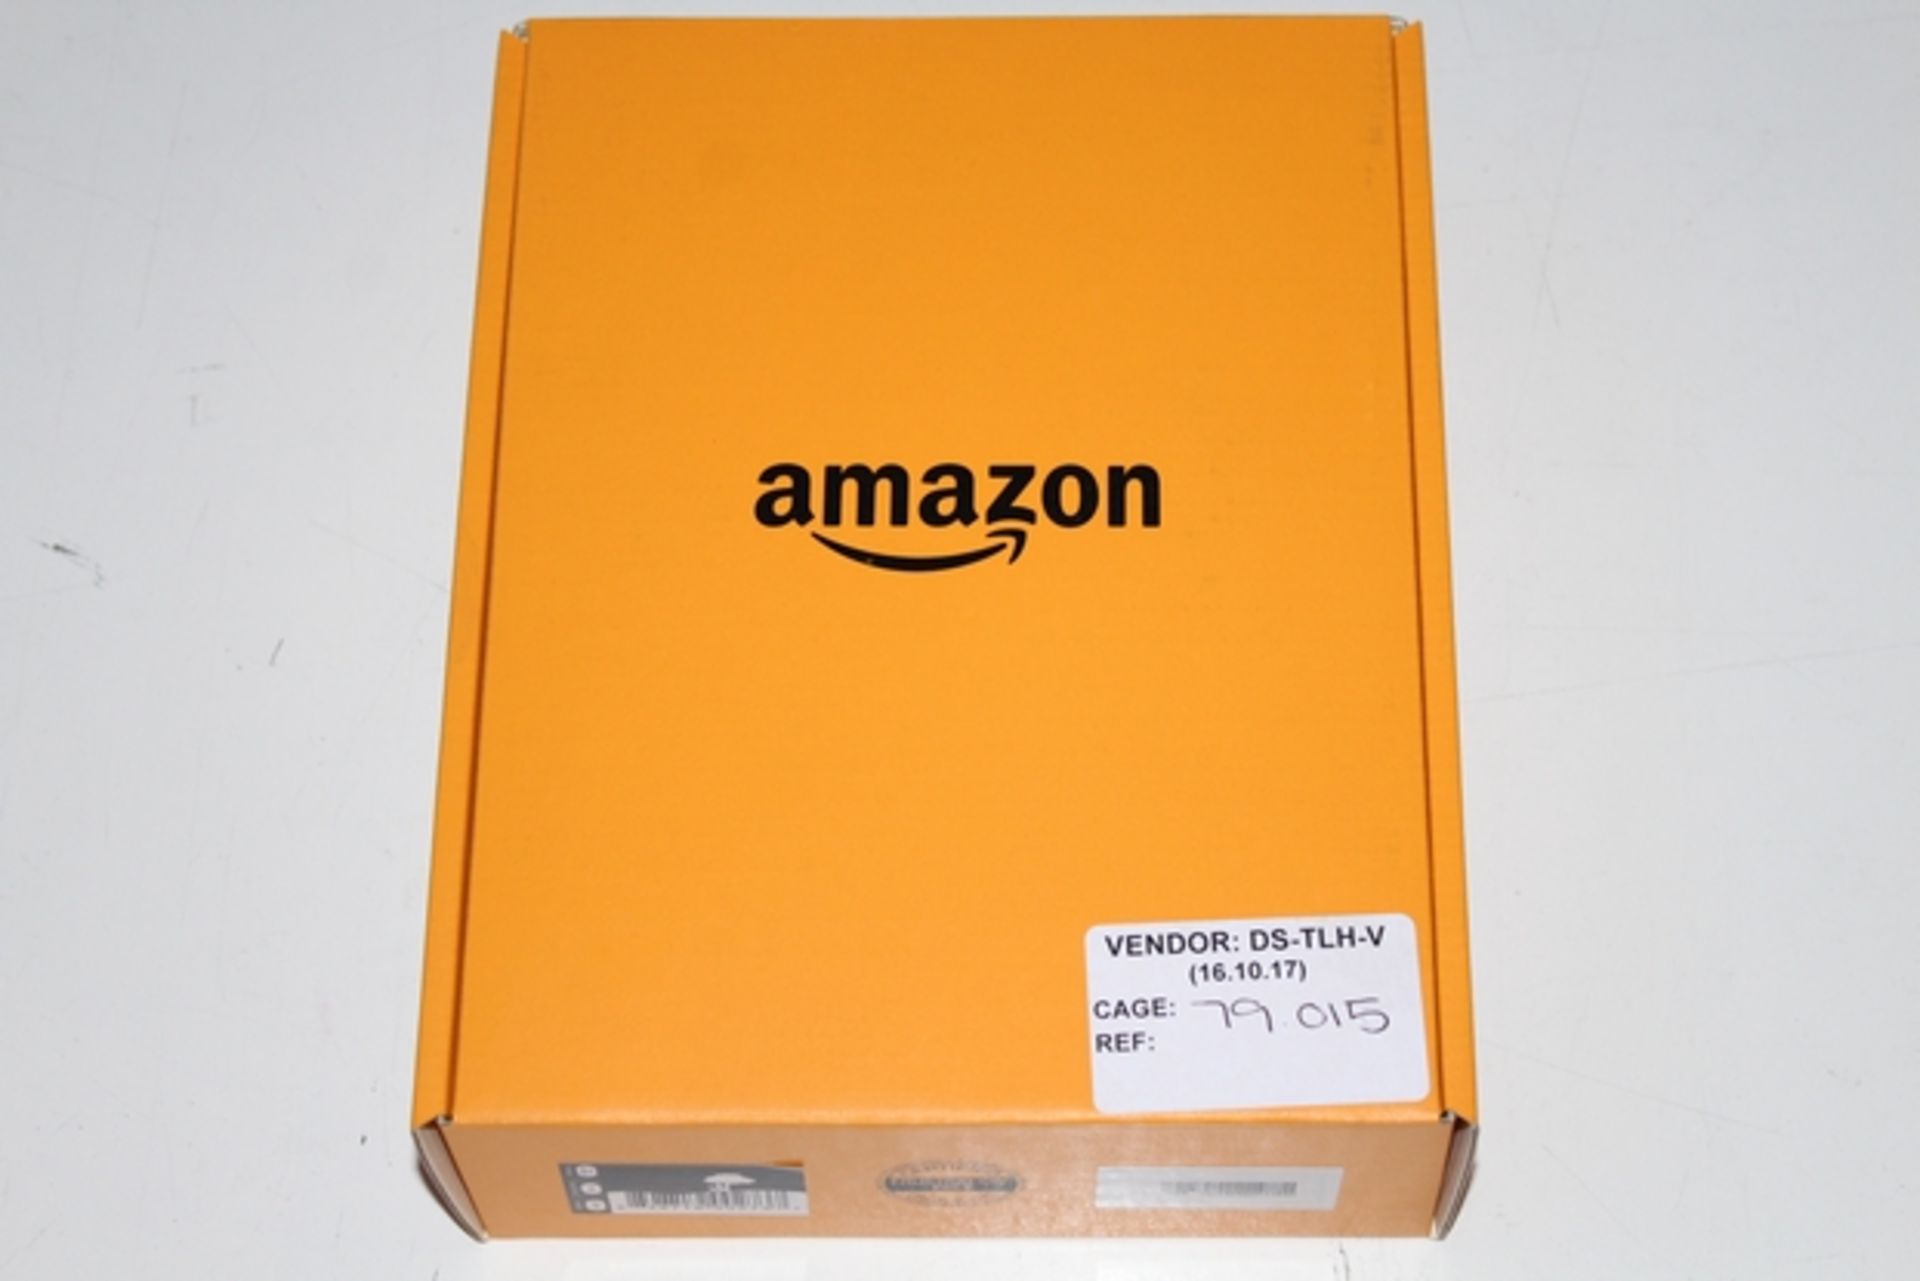 1X BOXED UNUSED AMAZON KINDLE FIRE DEMO UNIT (UNSURE OF FACTORY RESET) (DS-TLH-V) (79.015)